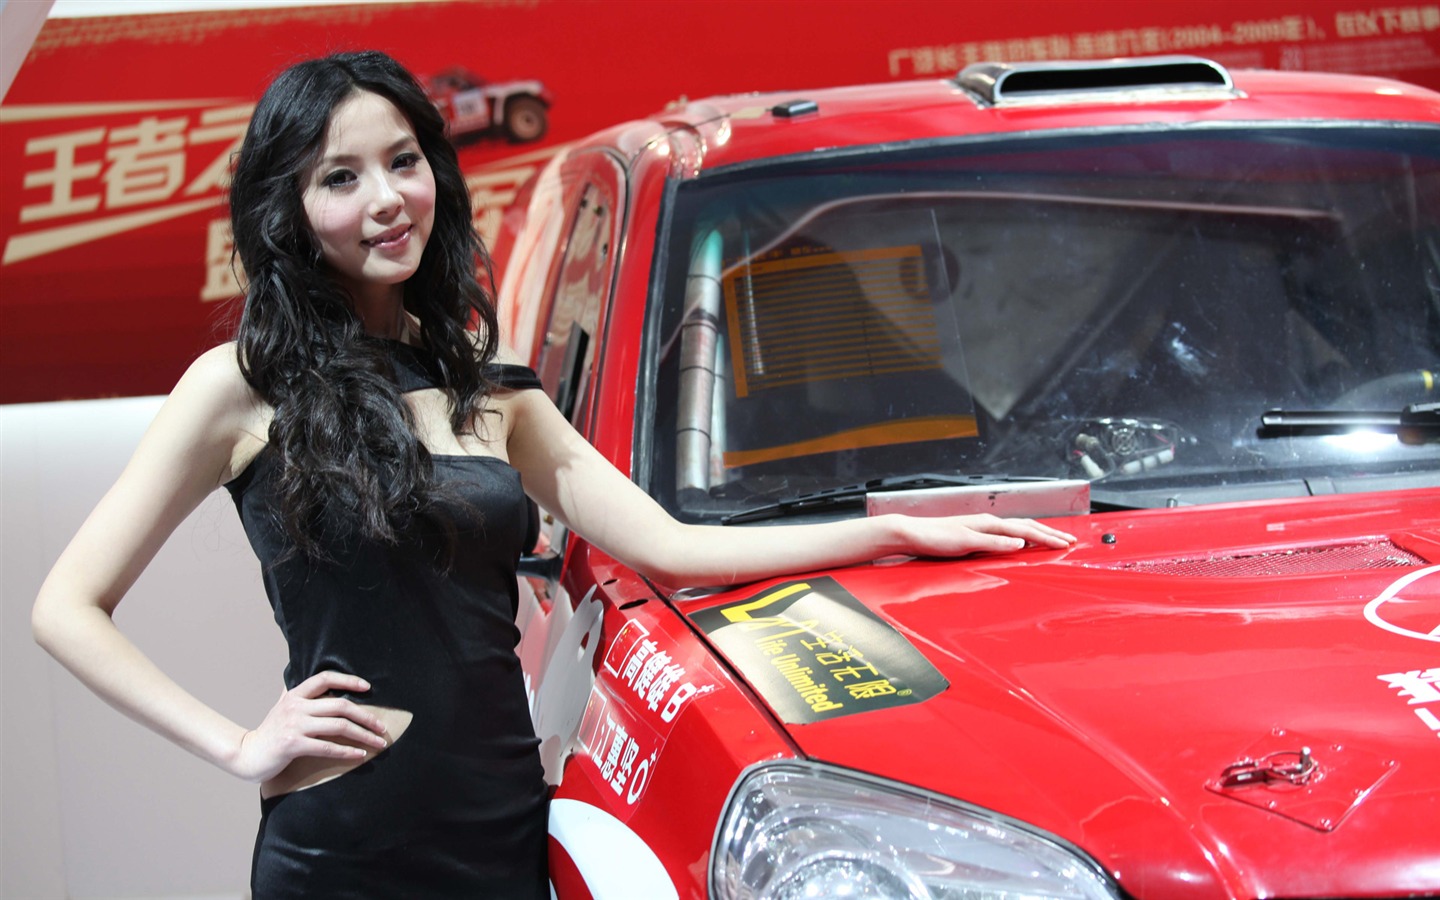 2010 Beijing International Auto Show beauty (1) (the wind chasing the clouds works) #32 - 1440x900